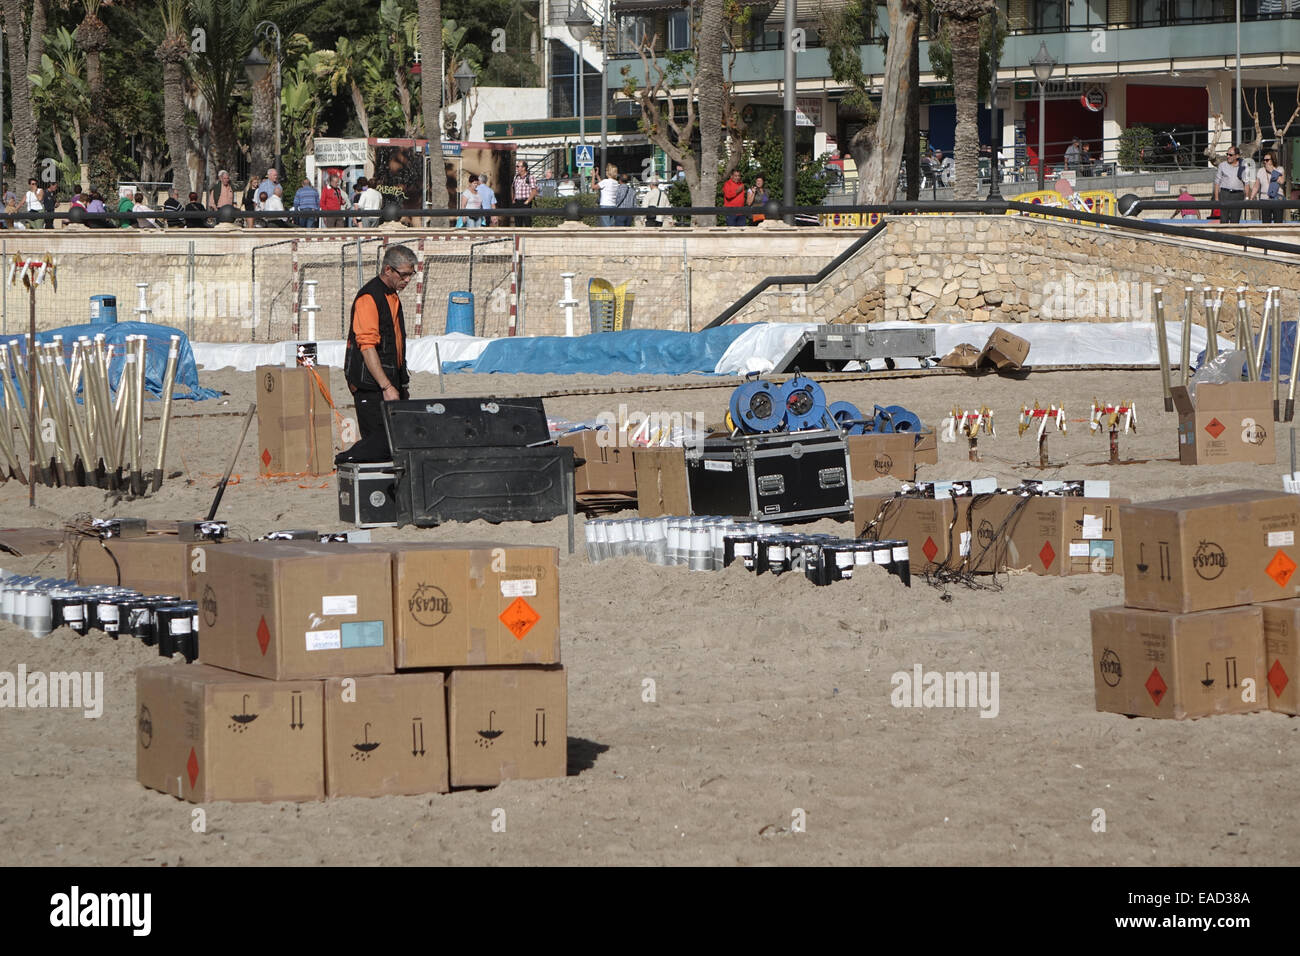 Benidorm, Spain. 12th November, 2014. The preparations for the final, gigantic fireworks spectacular of the Fiesta which happens tonight at 9pm are taking place in clear sunny weather on Poniente beach in Benidorm. Hundreds of explosive charges and mortar tubes which contain the larger fireworks are visible on the tourist beach which is fenced off for the popular event. Credit:  Mick Flynn/Alamy Live News Stock Photo